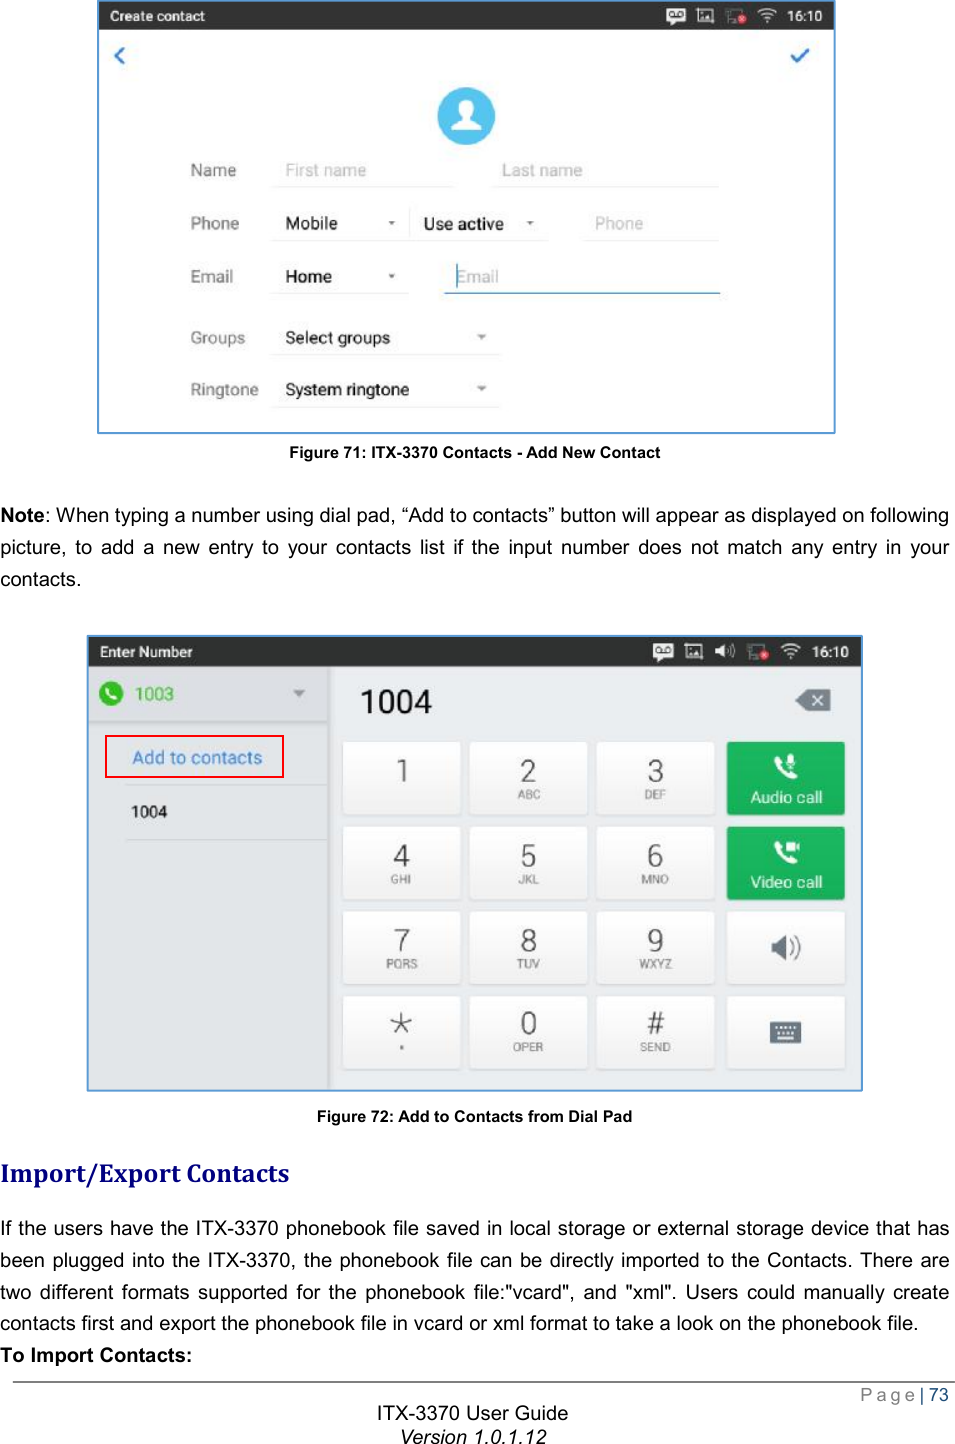  Page| 73  ITX-3370 User Guide Version 1.0.1.12  Figure 71: ITX-3370 Contacts - Add New Contact  Note: When typing a number using dial pad, “Add to contacts” button will appear as displayed on following picture, to add a new entry to your contacts list if the input number does not match any entry in your contacts.   Figure 72: Add to Contacts from Dial Pad Import/Export Contacts If the users have the ITX-3370 phonebook file saved in local storage or external storage device that has been plugged into the ITX-3370, the phonebook file can be directly imported to the Contacts. There are two different formats supported for the phonebook file:&quot;vcard&quot;, and &quot;xml&quot;. Users could manually create contacts first and export the phonebook file in vcard or xml format to take a look on the phonebook file. To Import Contacts: 